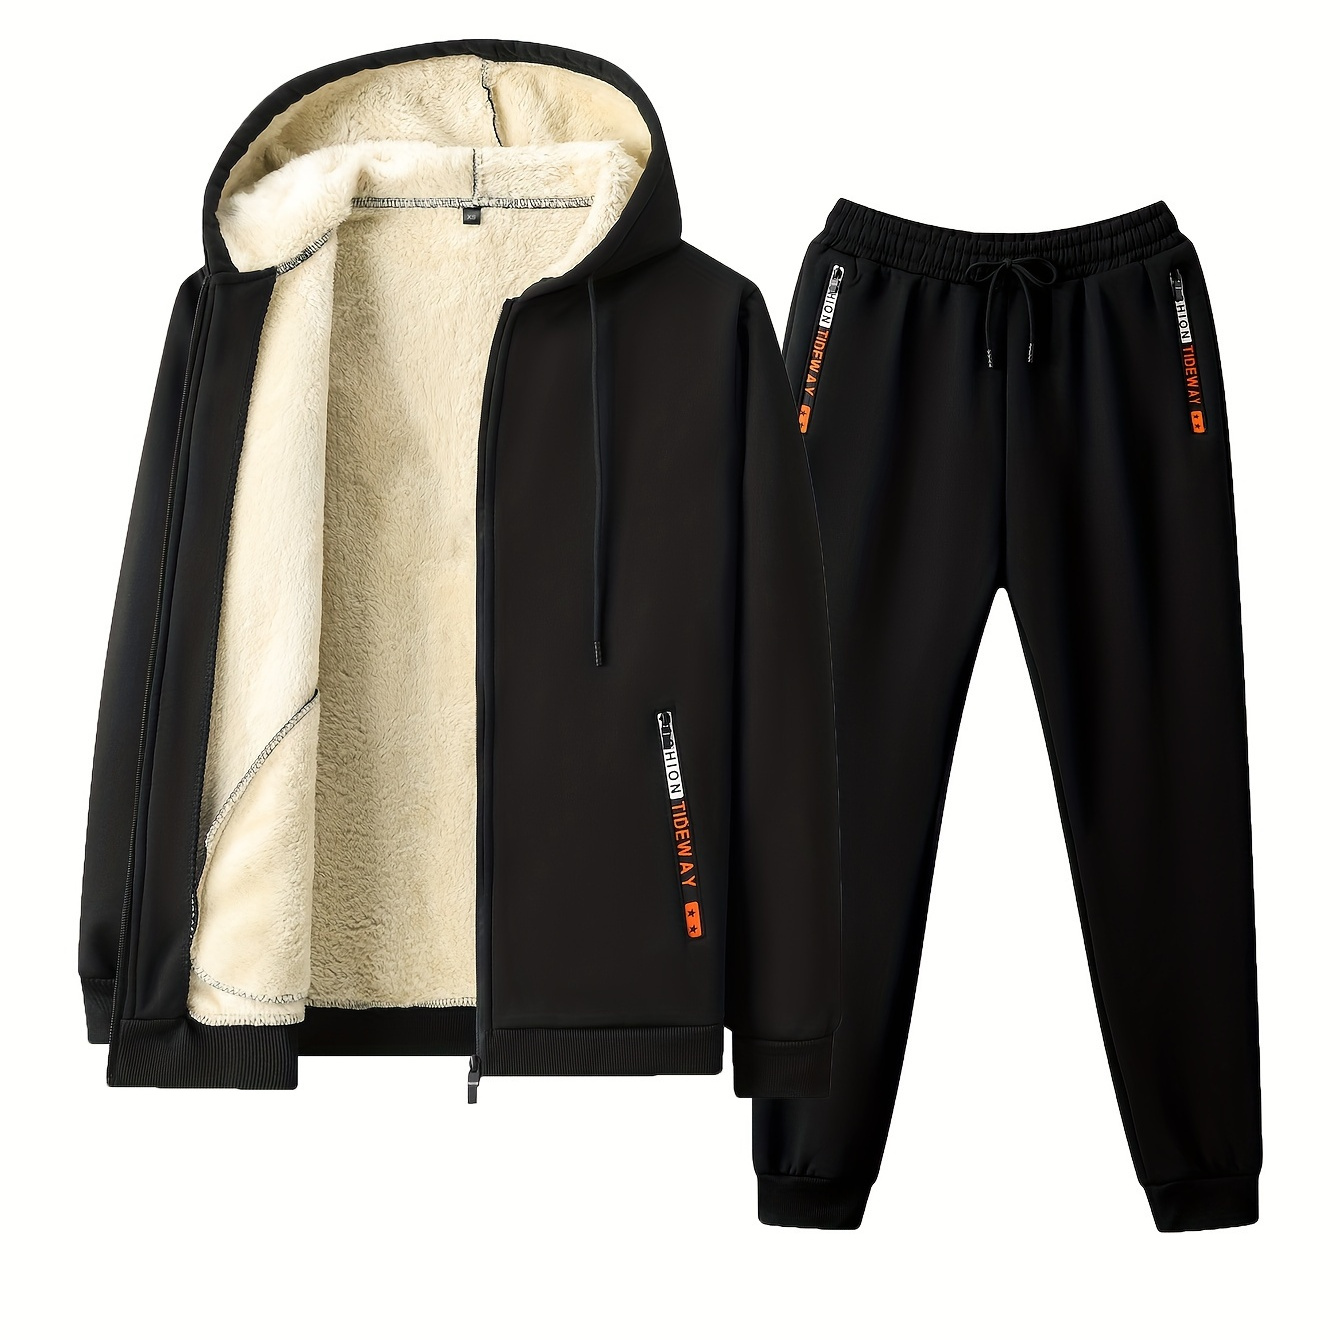 

Classic Men's Athletic 2pcs Fleece Lined Tracksuit Set Casual Full-zip Sweatsuits Long Sleeve Hoodie And Jogging Pants Set For Gym Workout Running